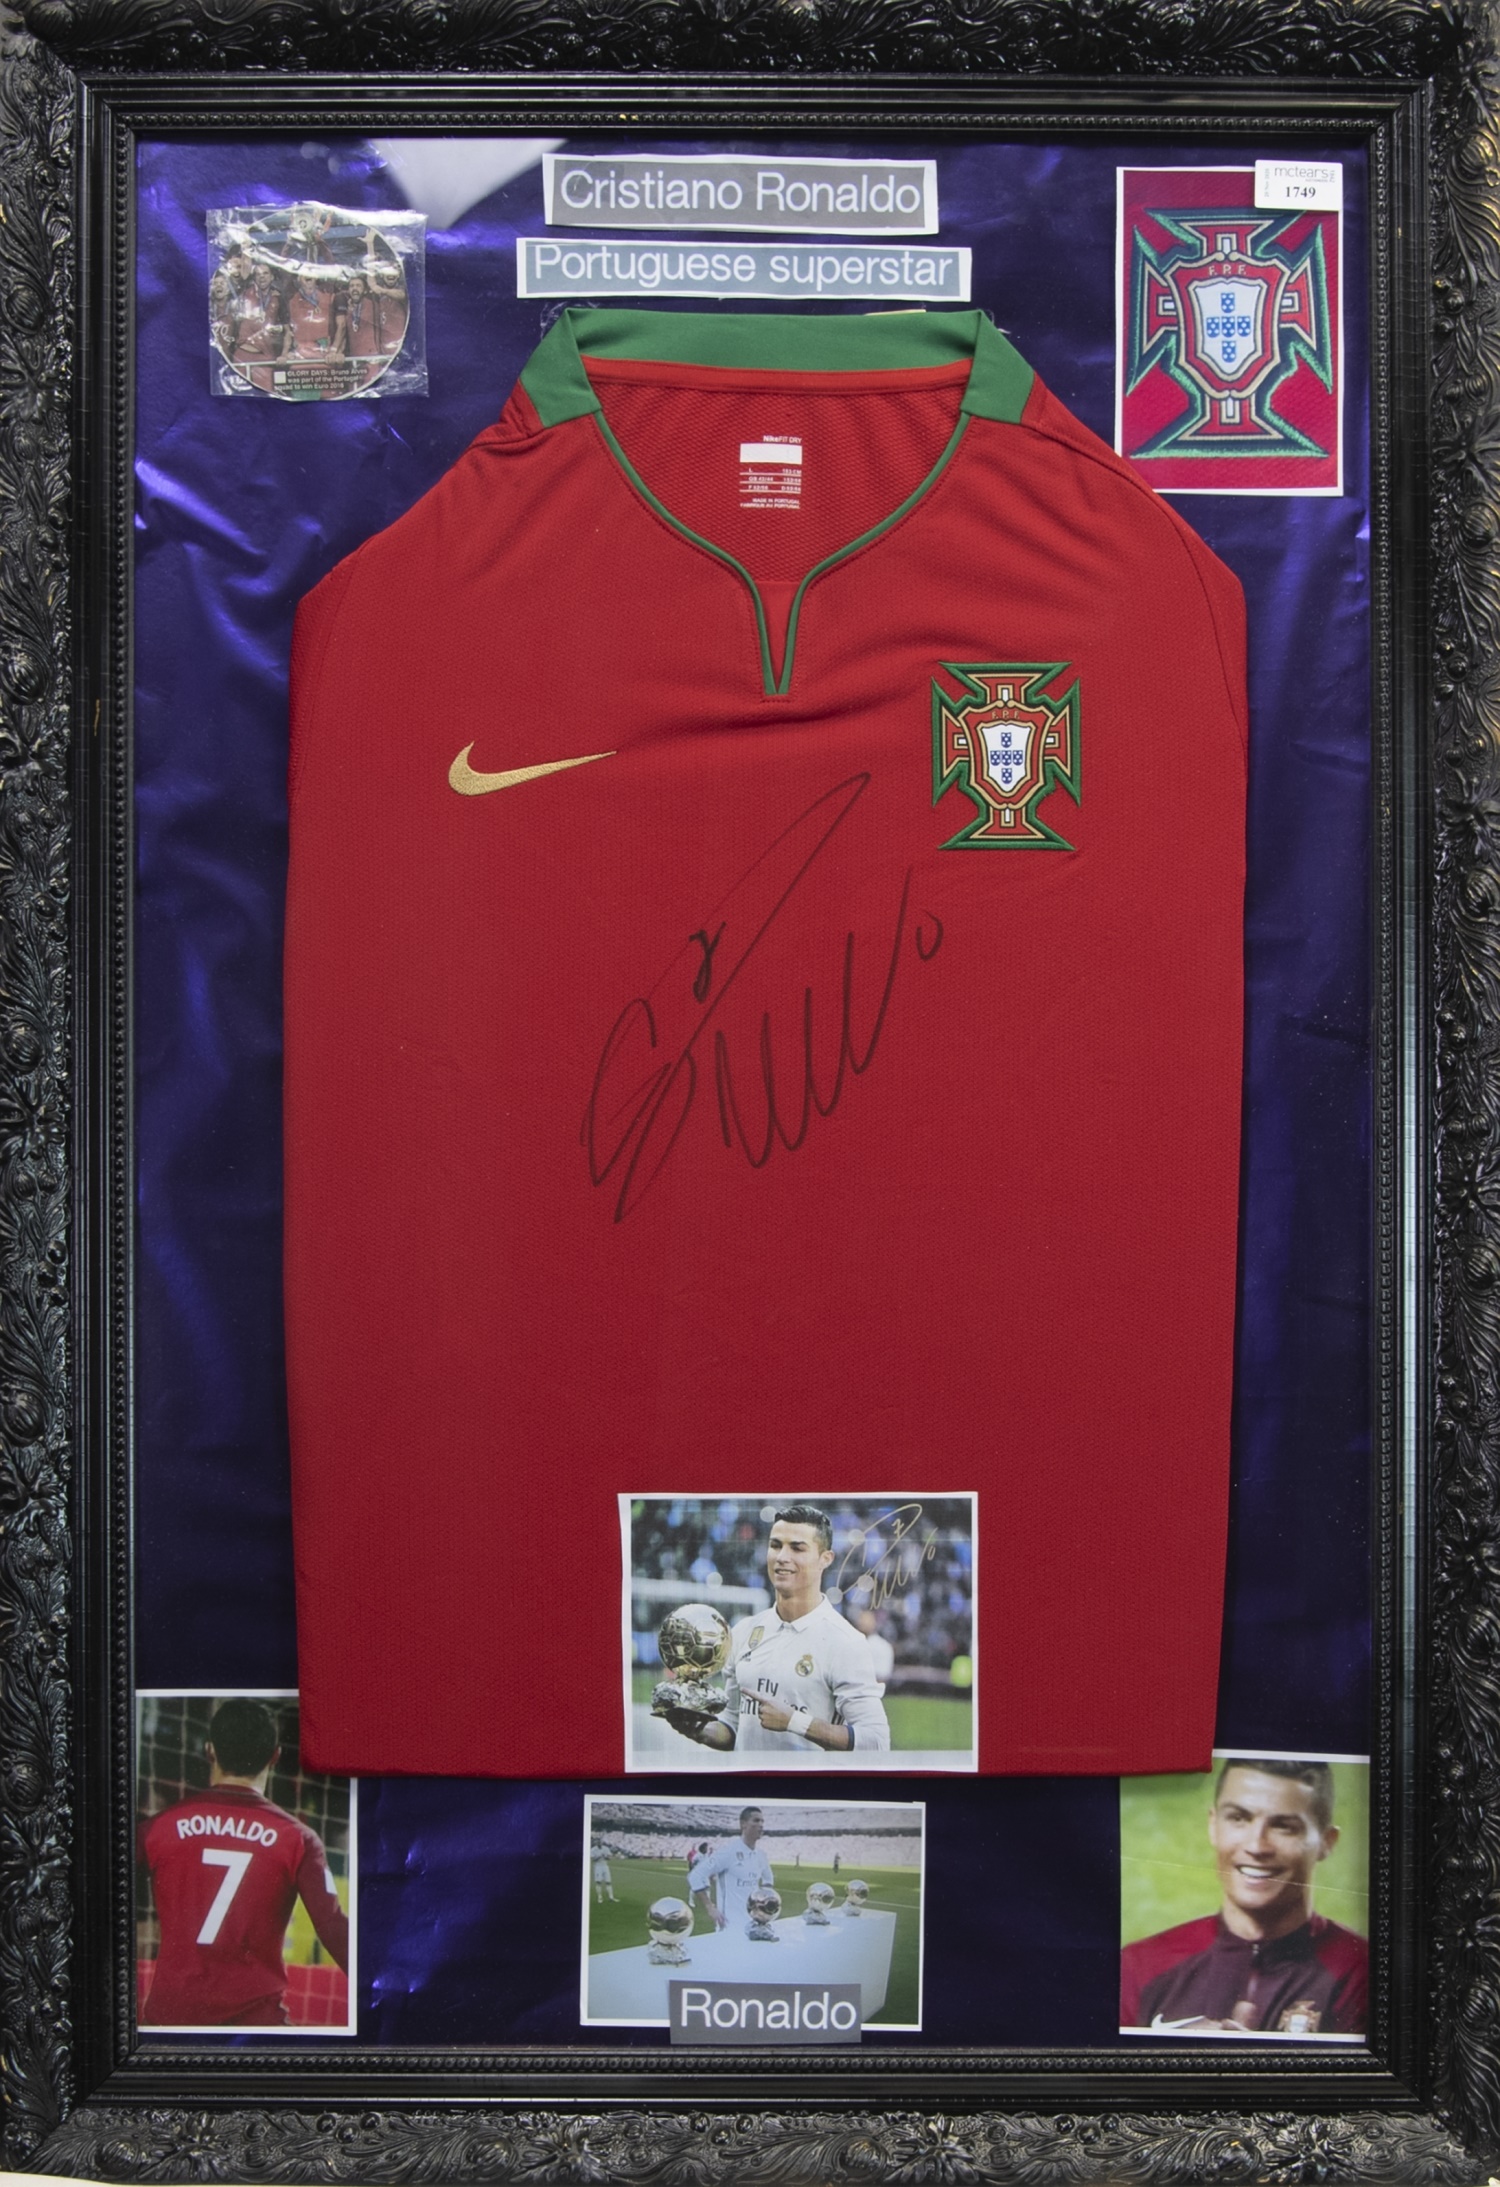 A SIGNED PORTUGAL FOOTBALL JERSEY